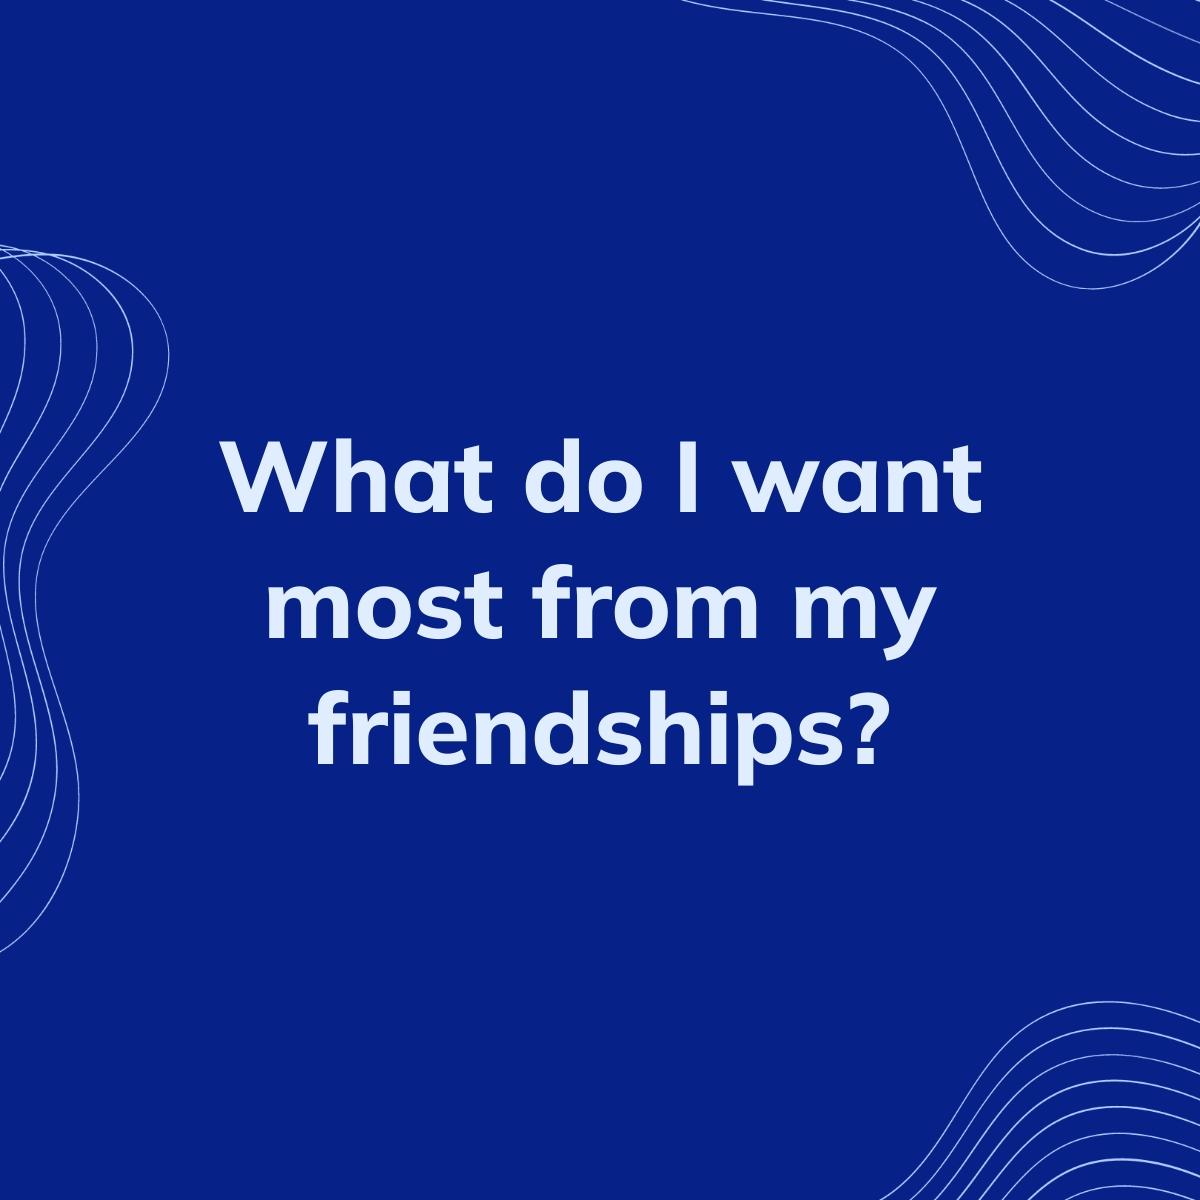 Journal Prompt: What do I want most from my friendships?